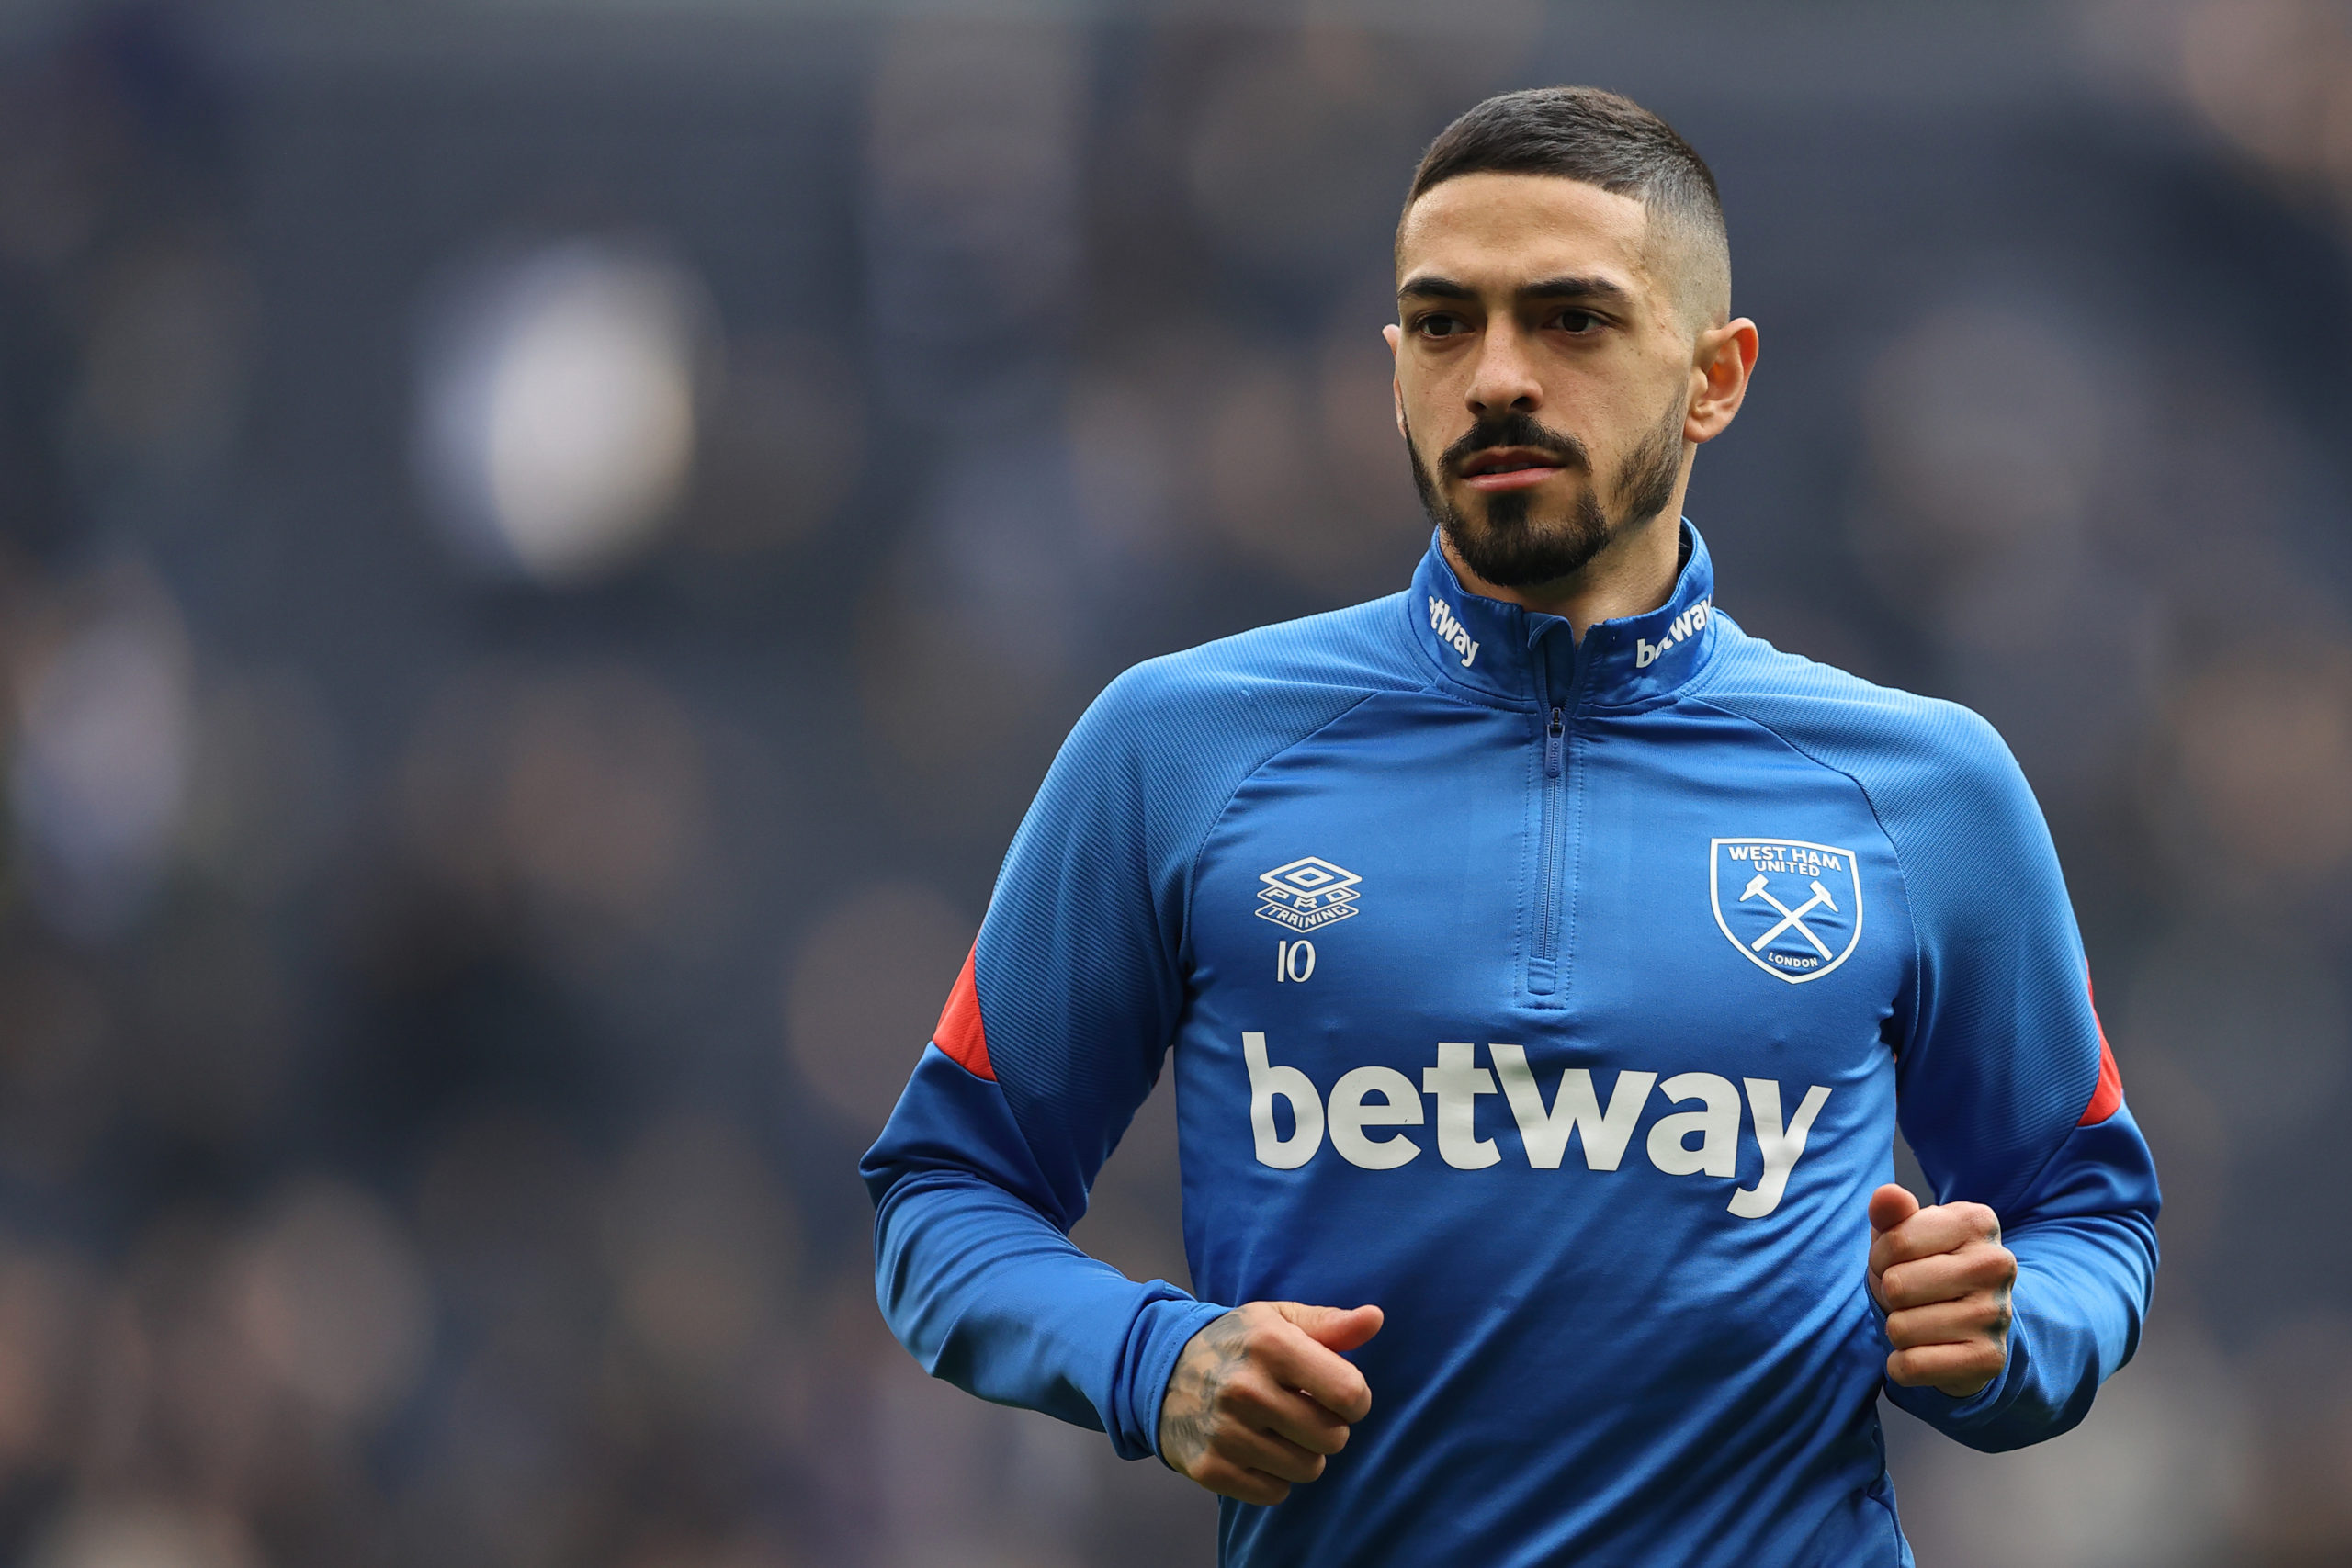 West Ham star Manuel Lanzini handed a very unwelcome award after horrendous stats in dismal opening day defeat to Man City